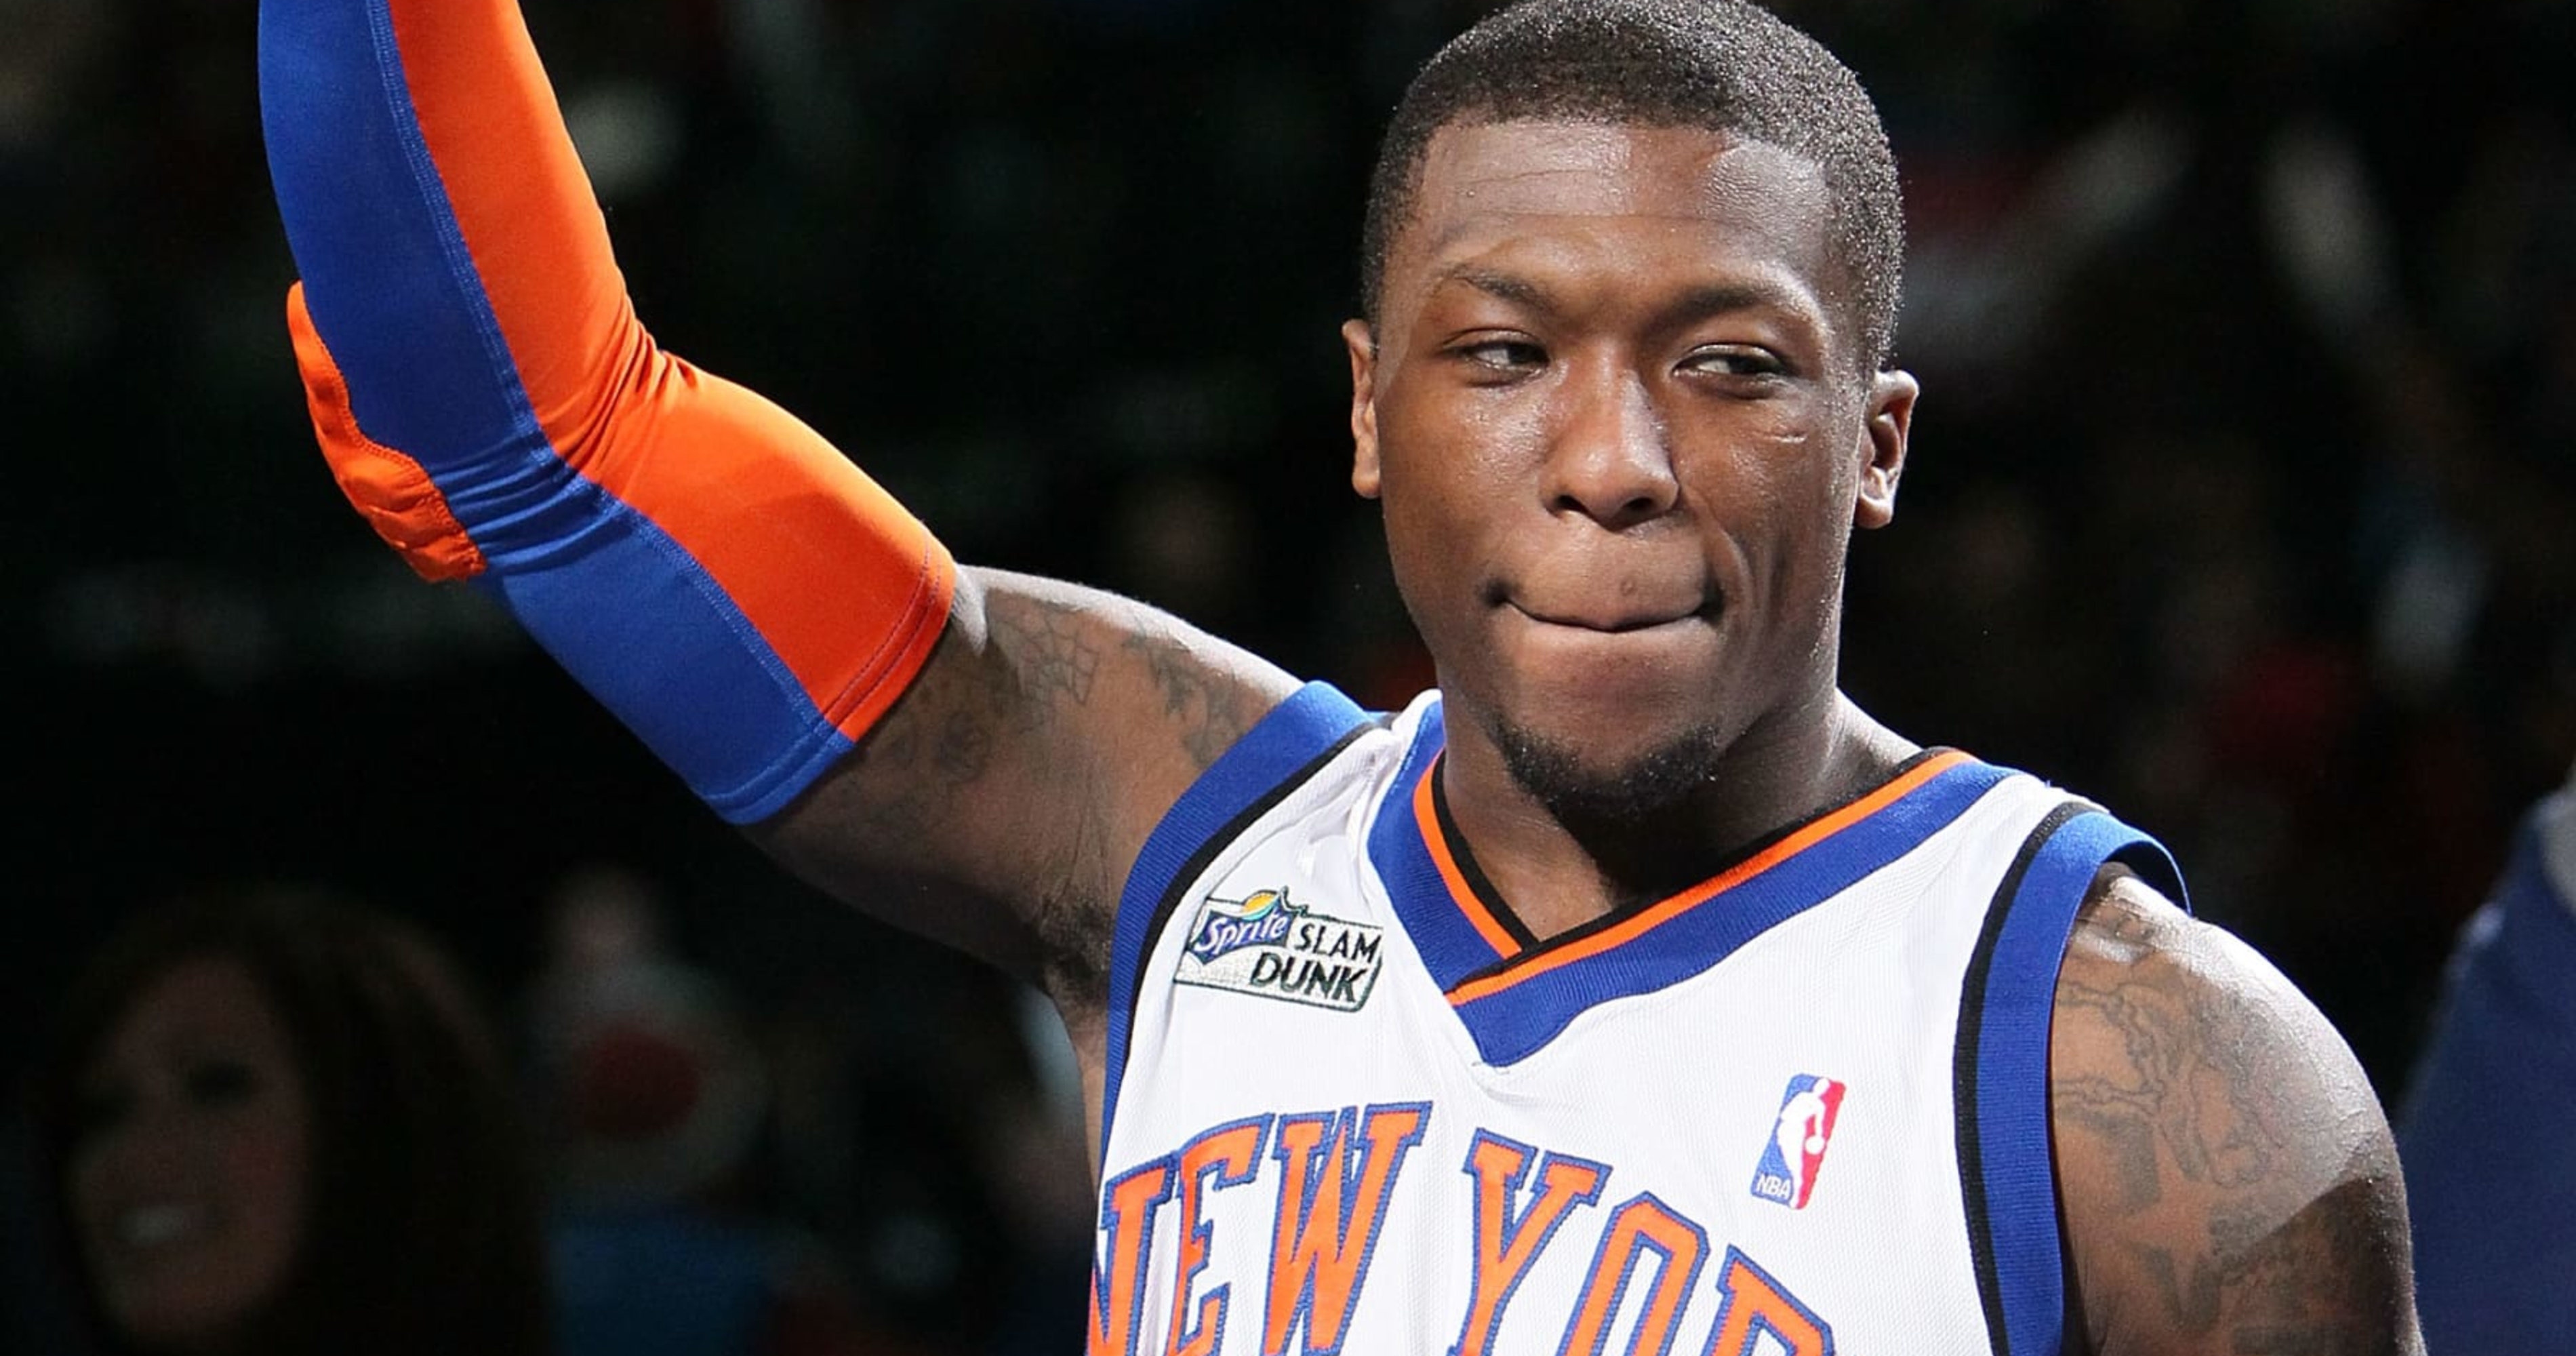 Former NBA Star Nate Robinson Announces He's Undergoing Treatment for